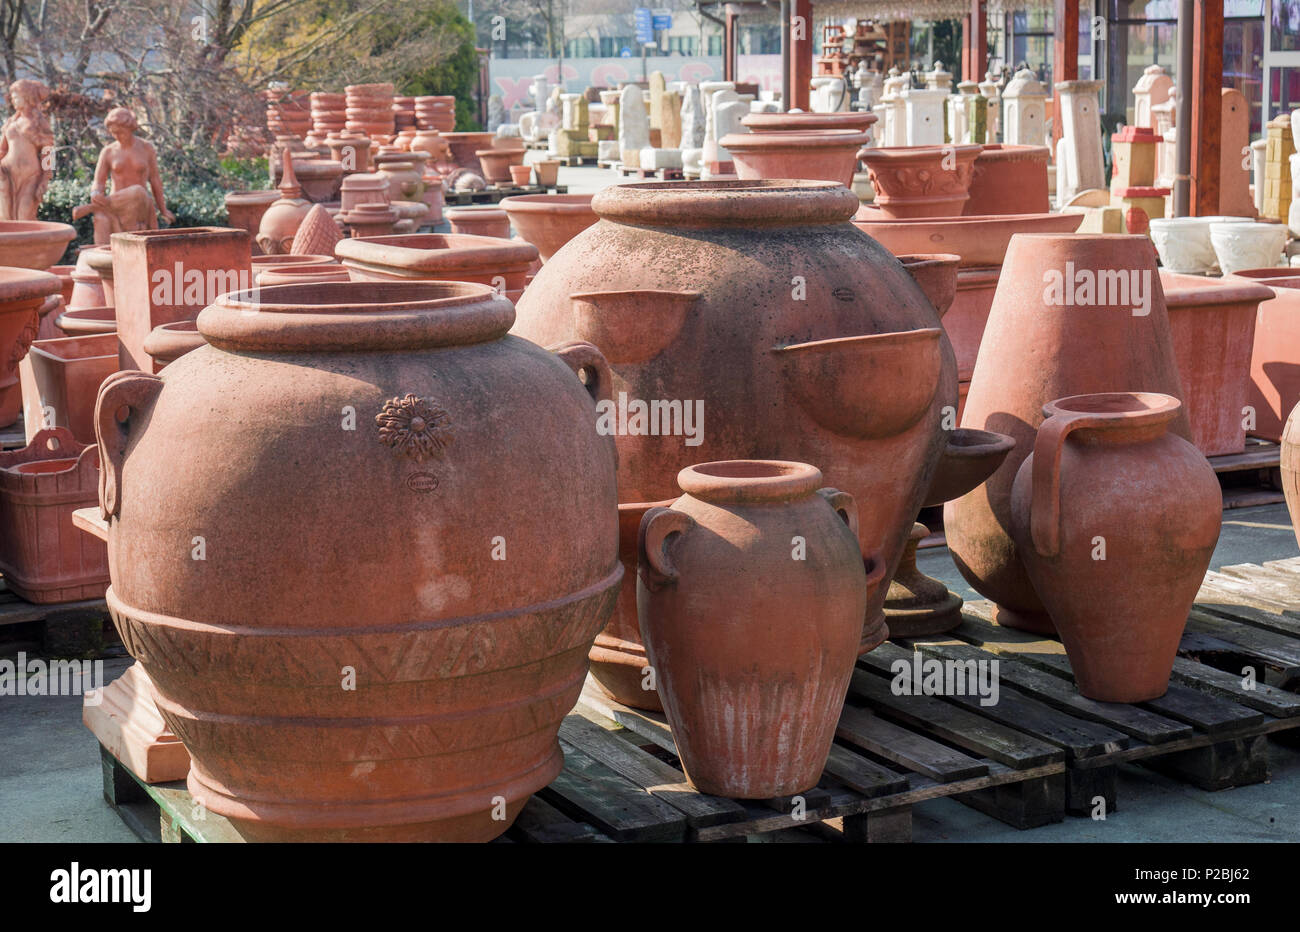 lot of vases with different sizes for sale in a nursery Stock Photo